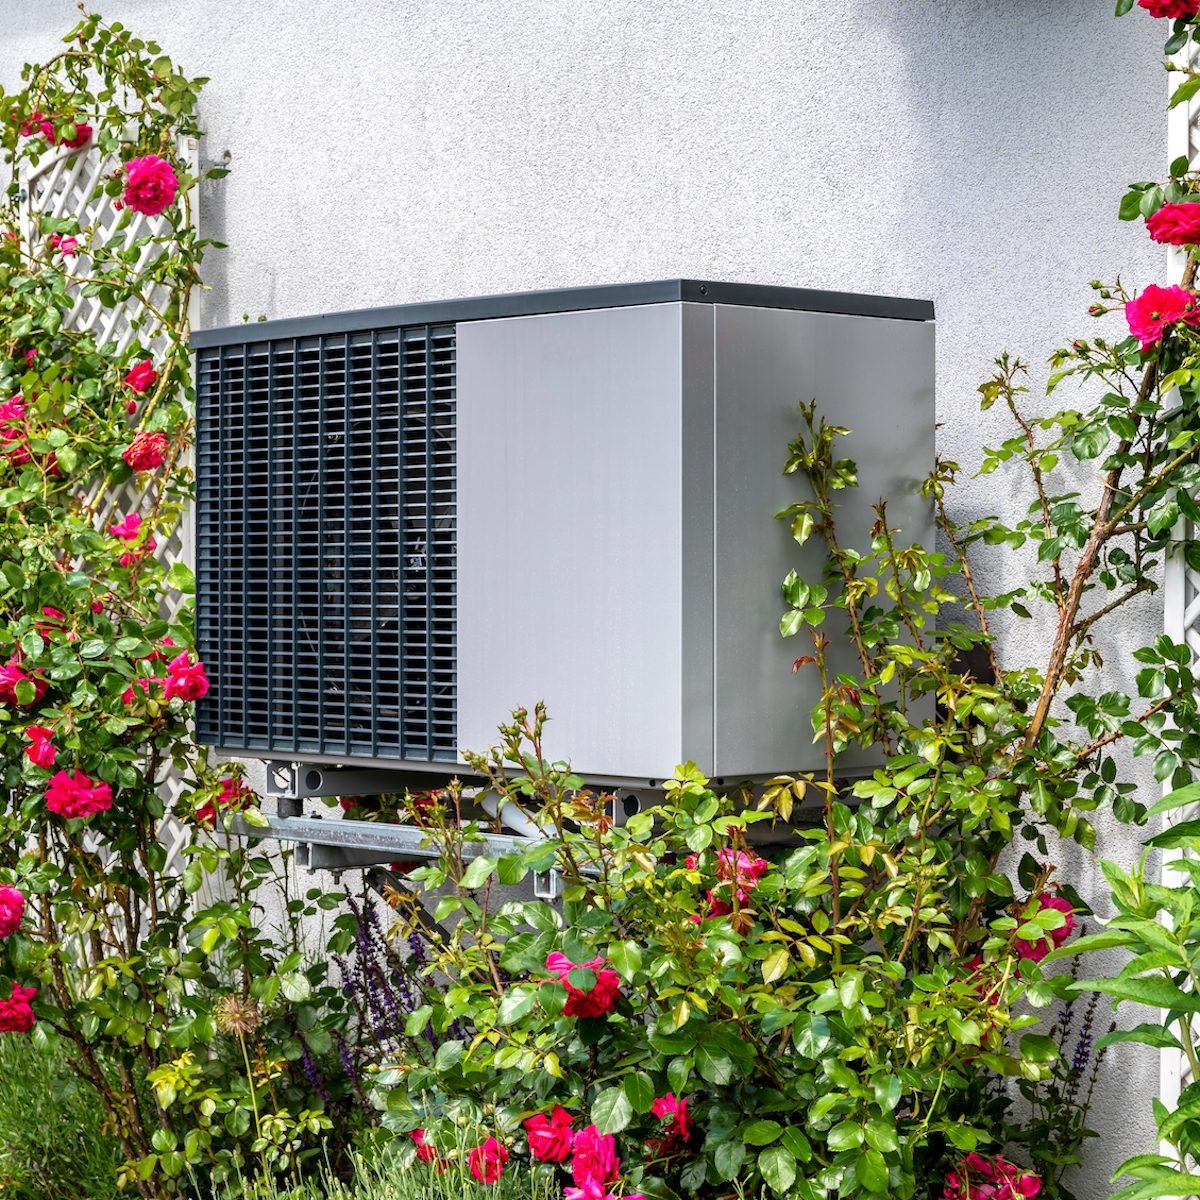 What Is a Heat Pump System?